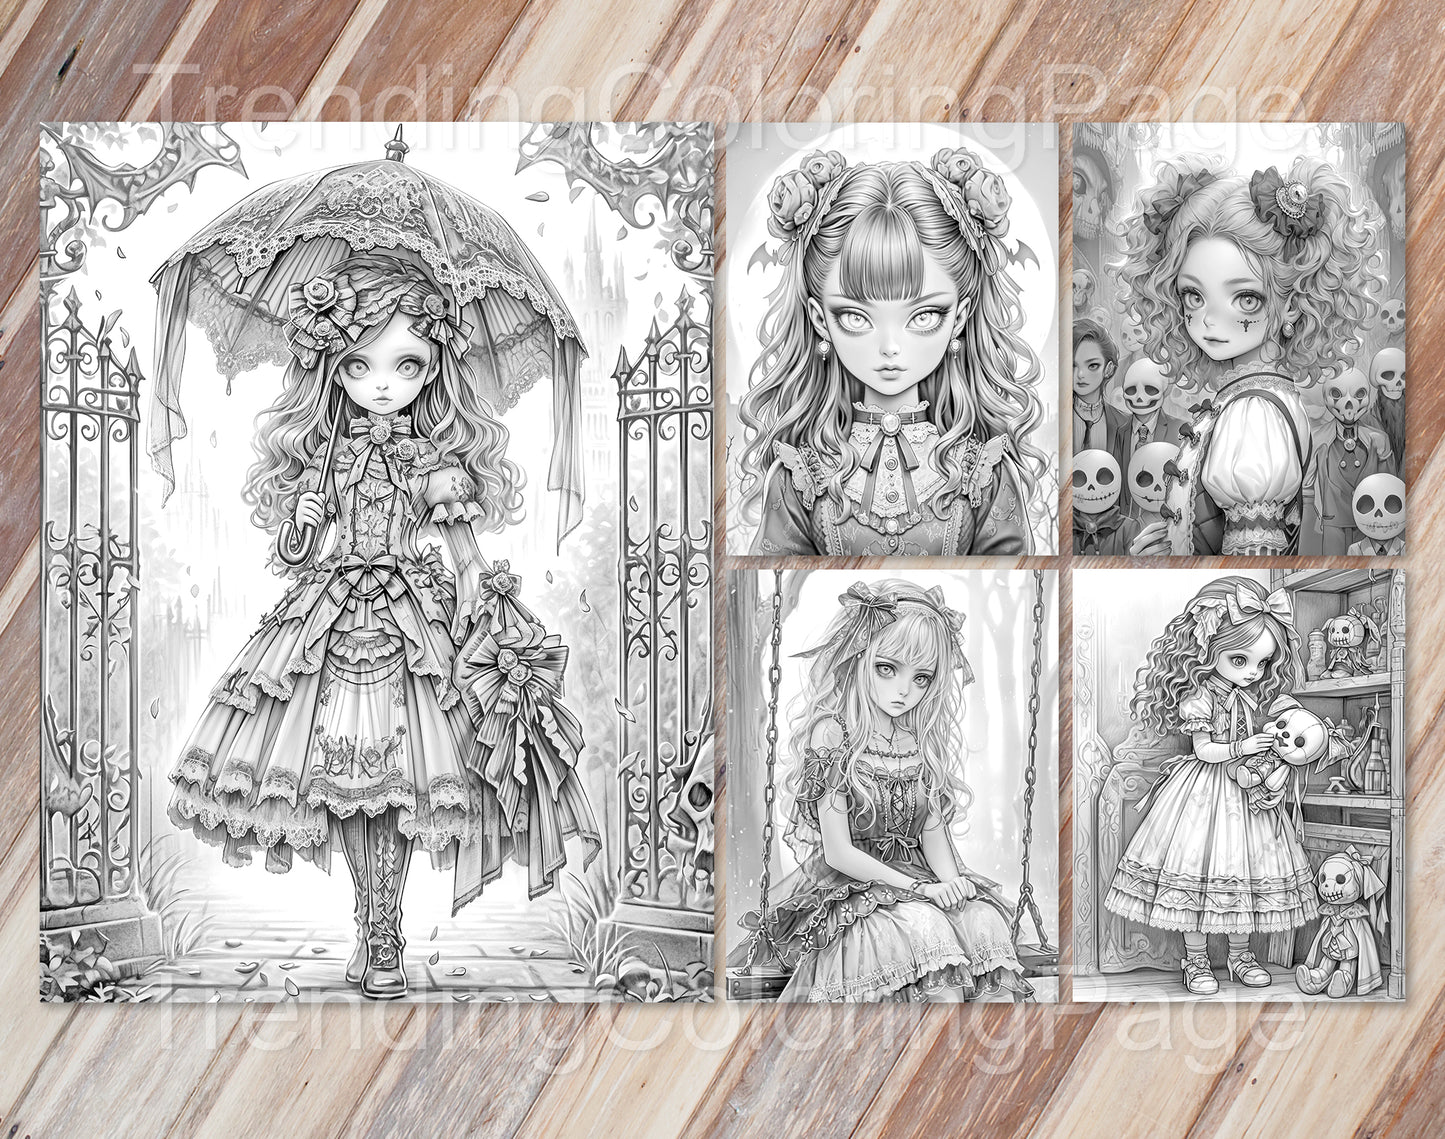 30 Little Gothic Princess Grayscale Coloring Pages  - Instant Download - Printable Dark/Light